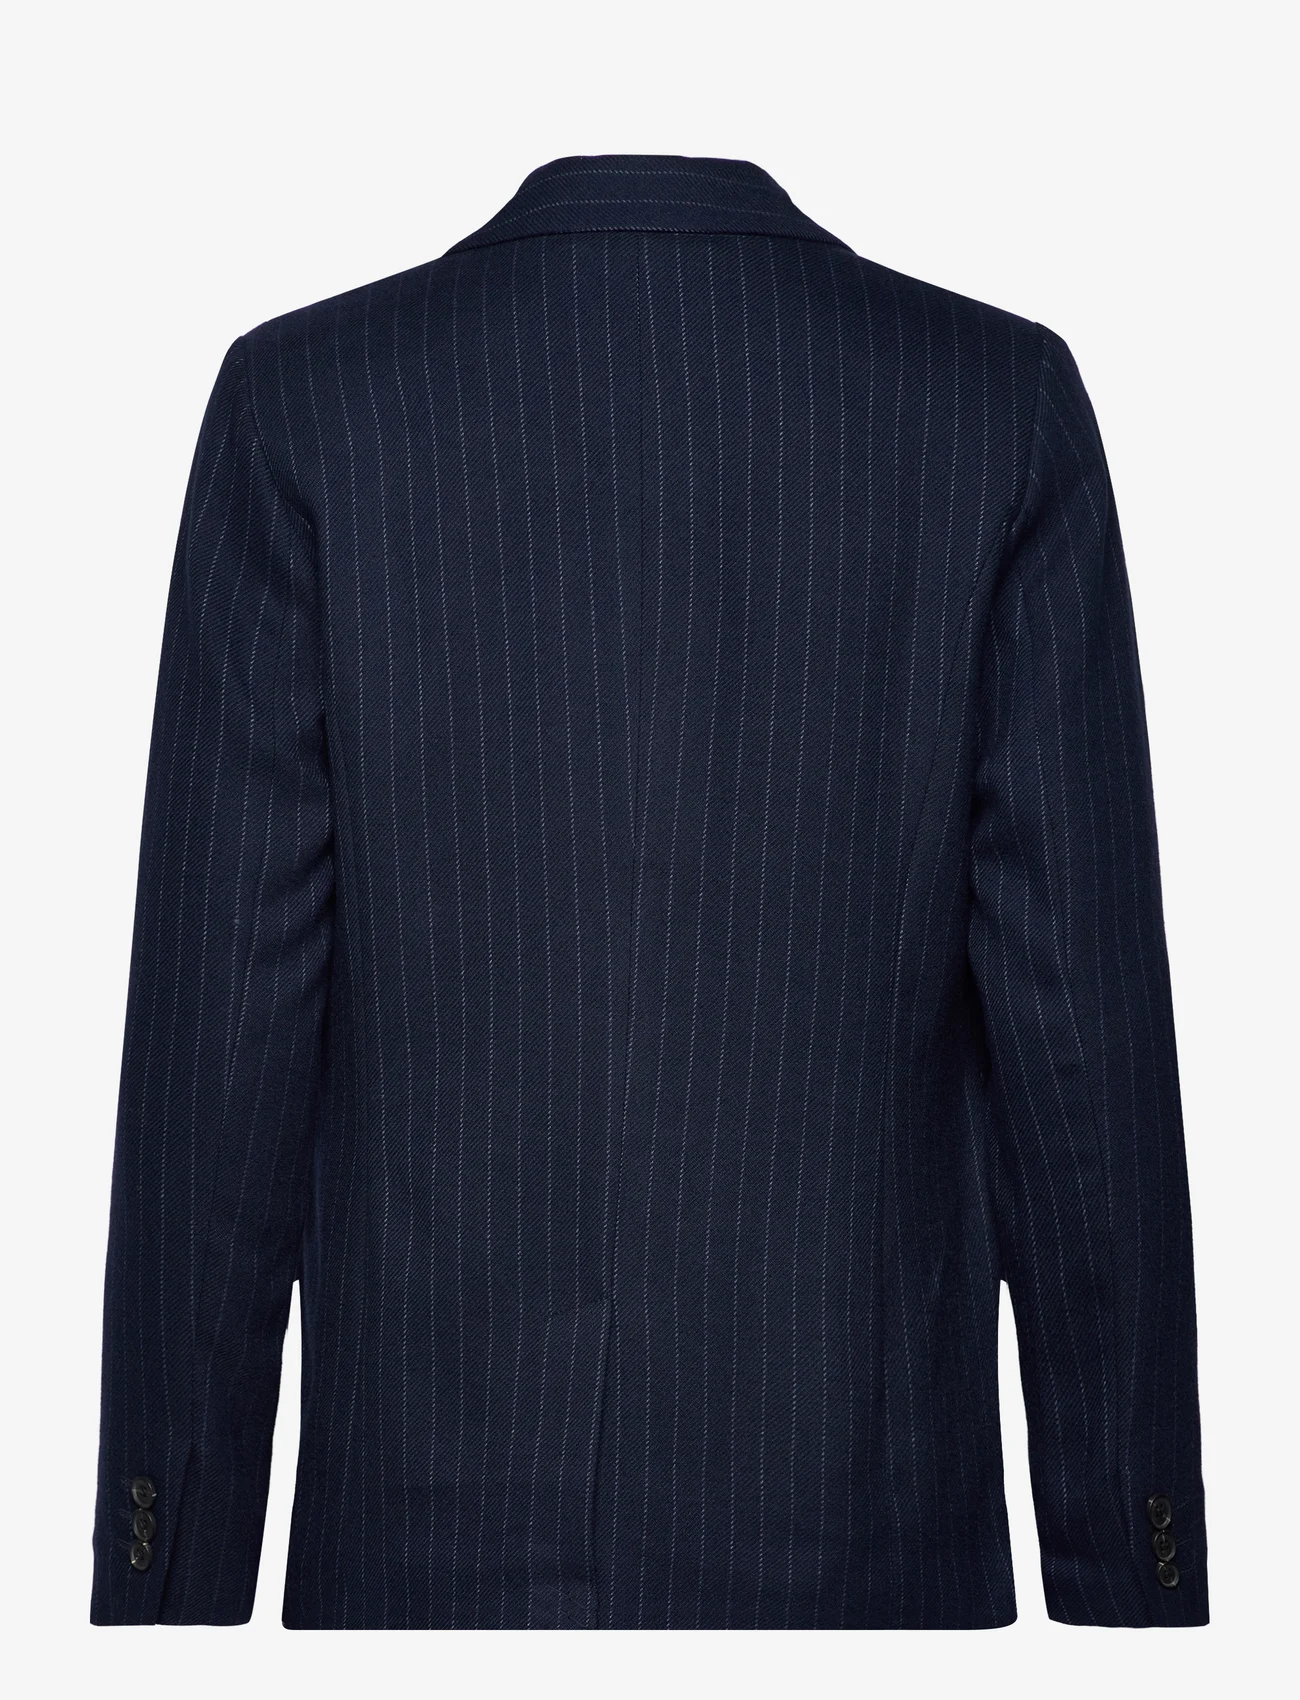 Tom Tailor - pinstripe blazer - party wear at outlet prices - navy pinstripe - 1